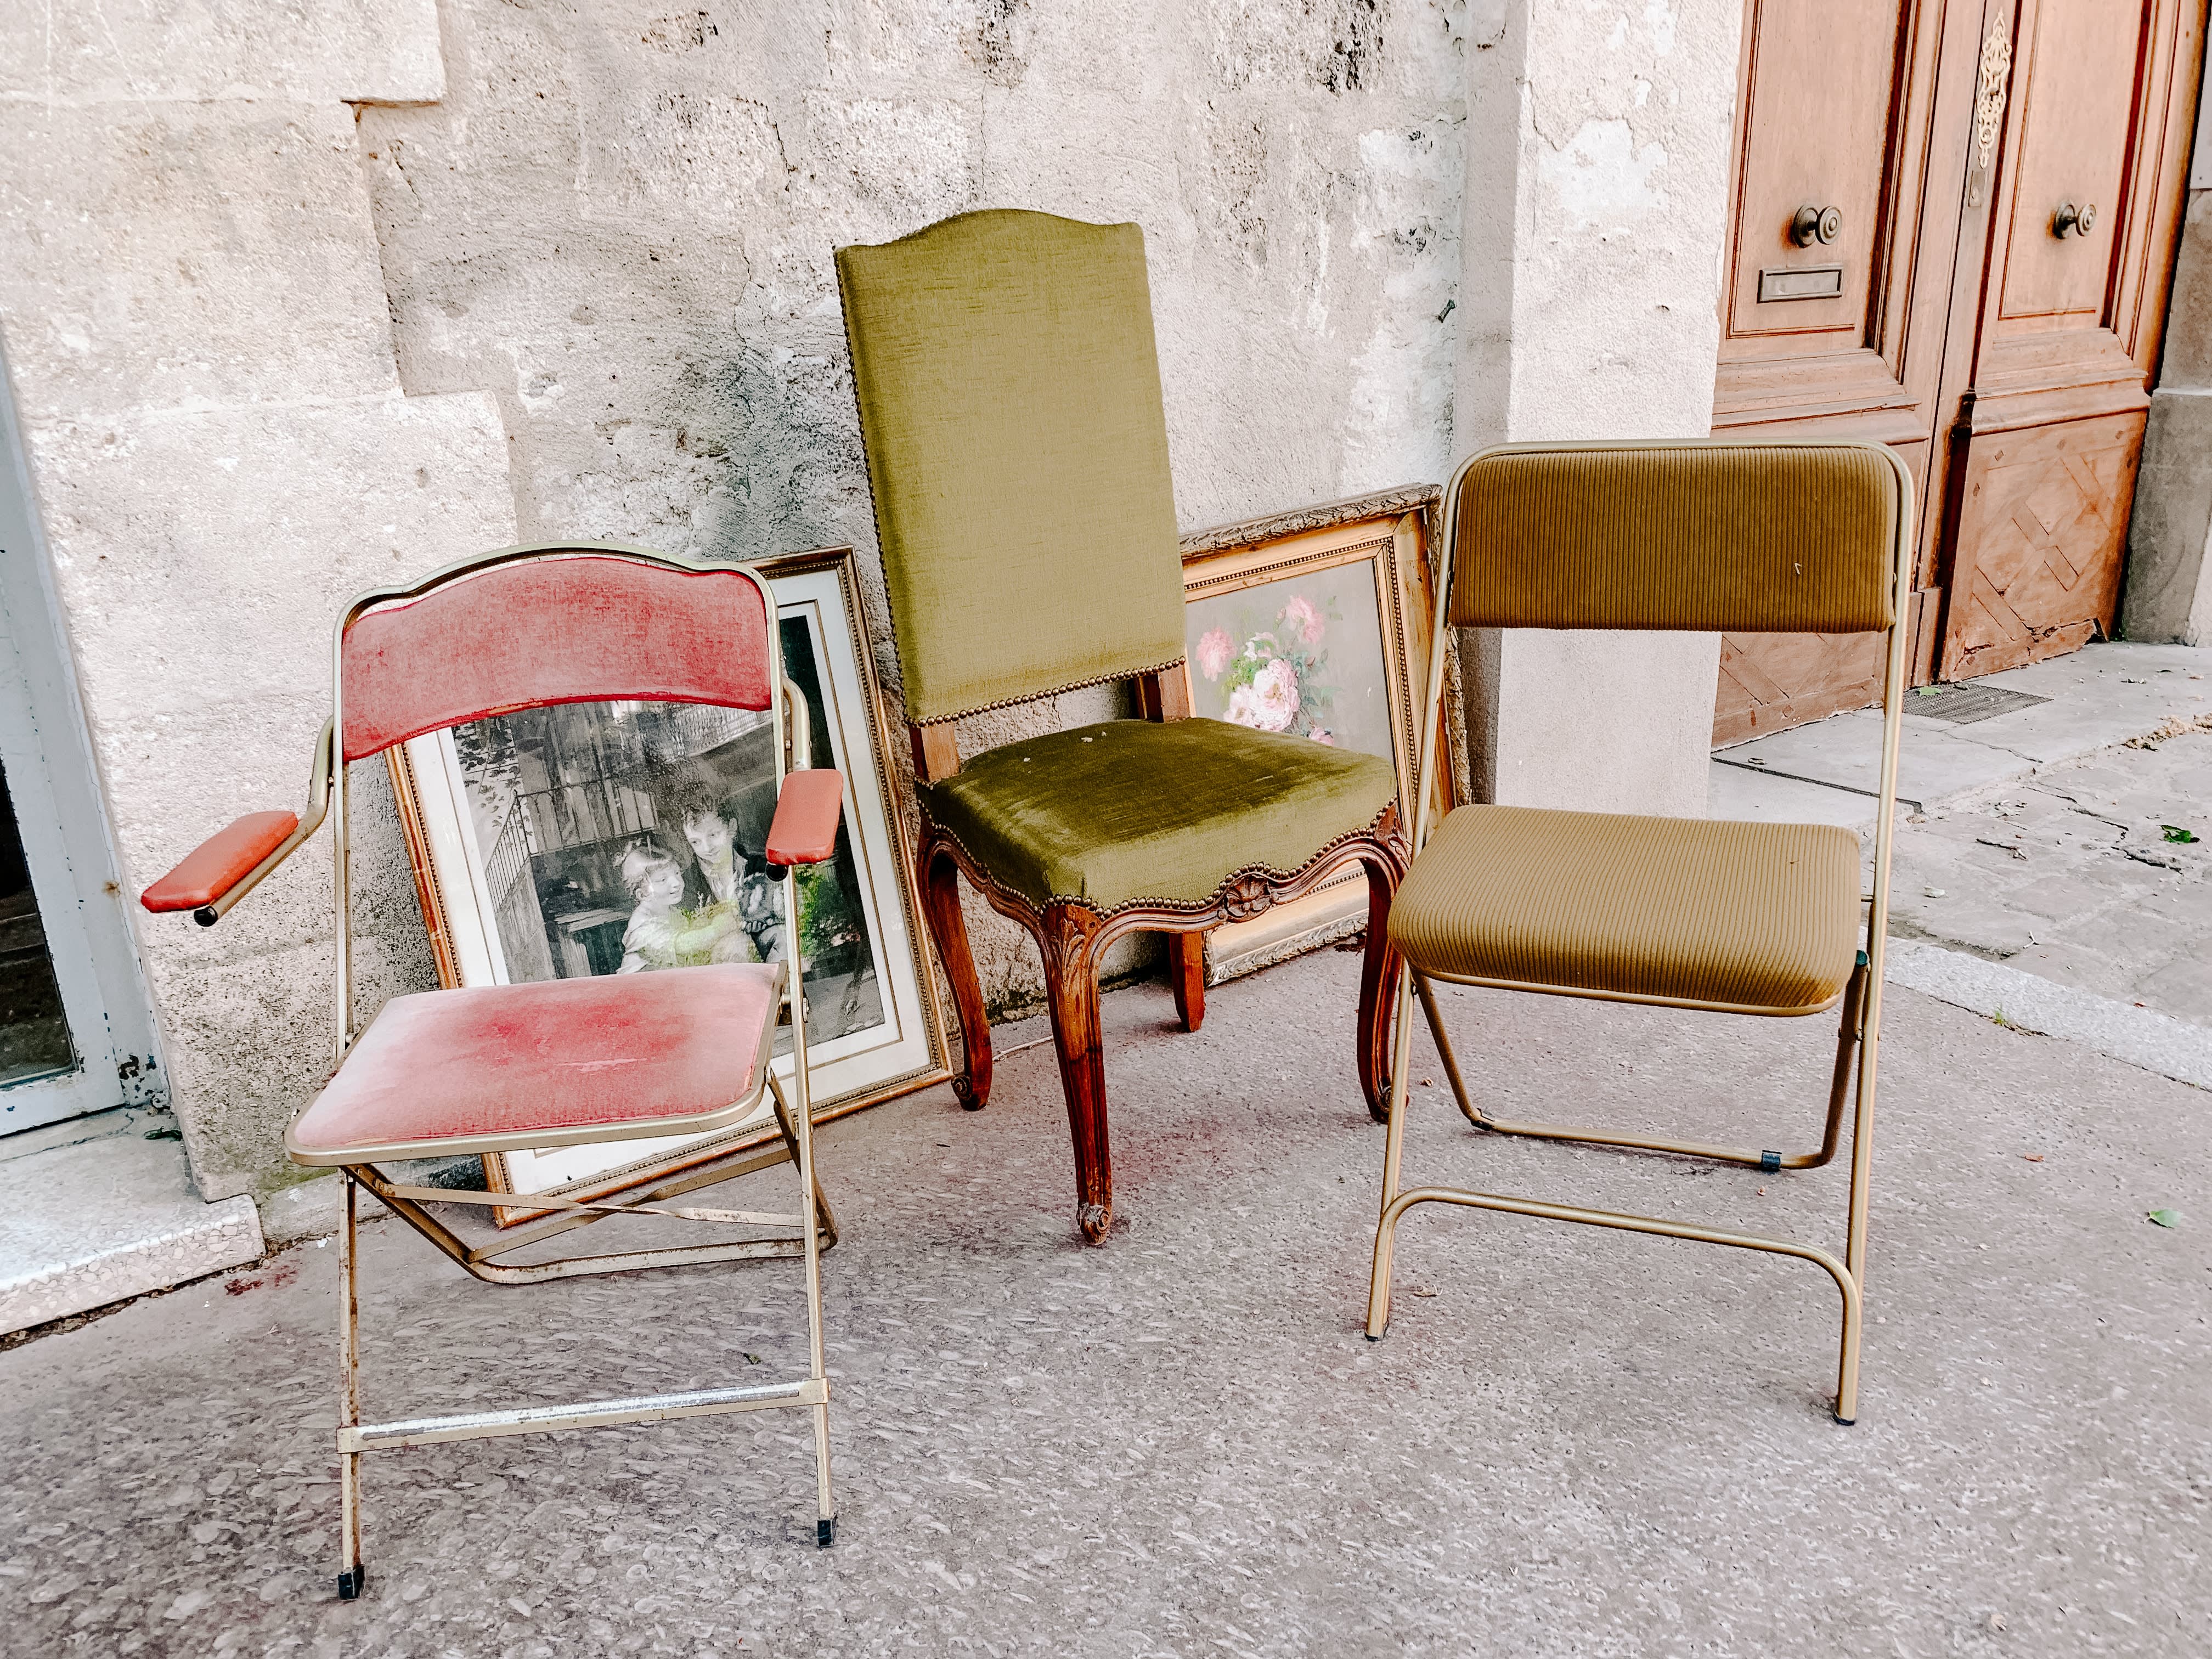 How to Set Up Your Place With Second Hand Furniture in Berlin